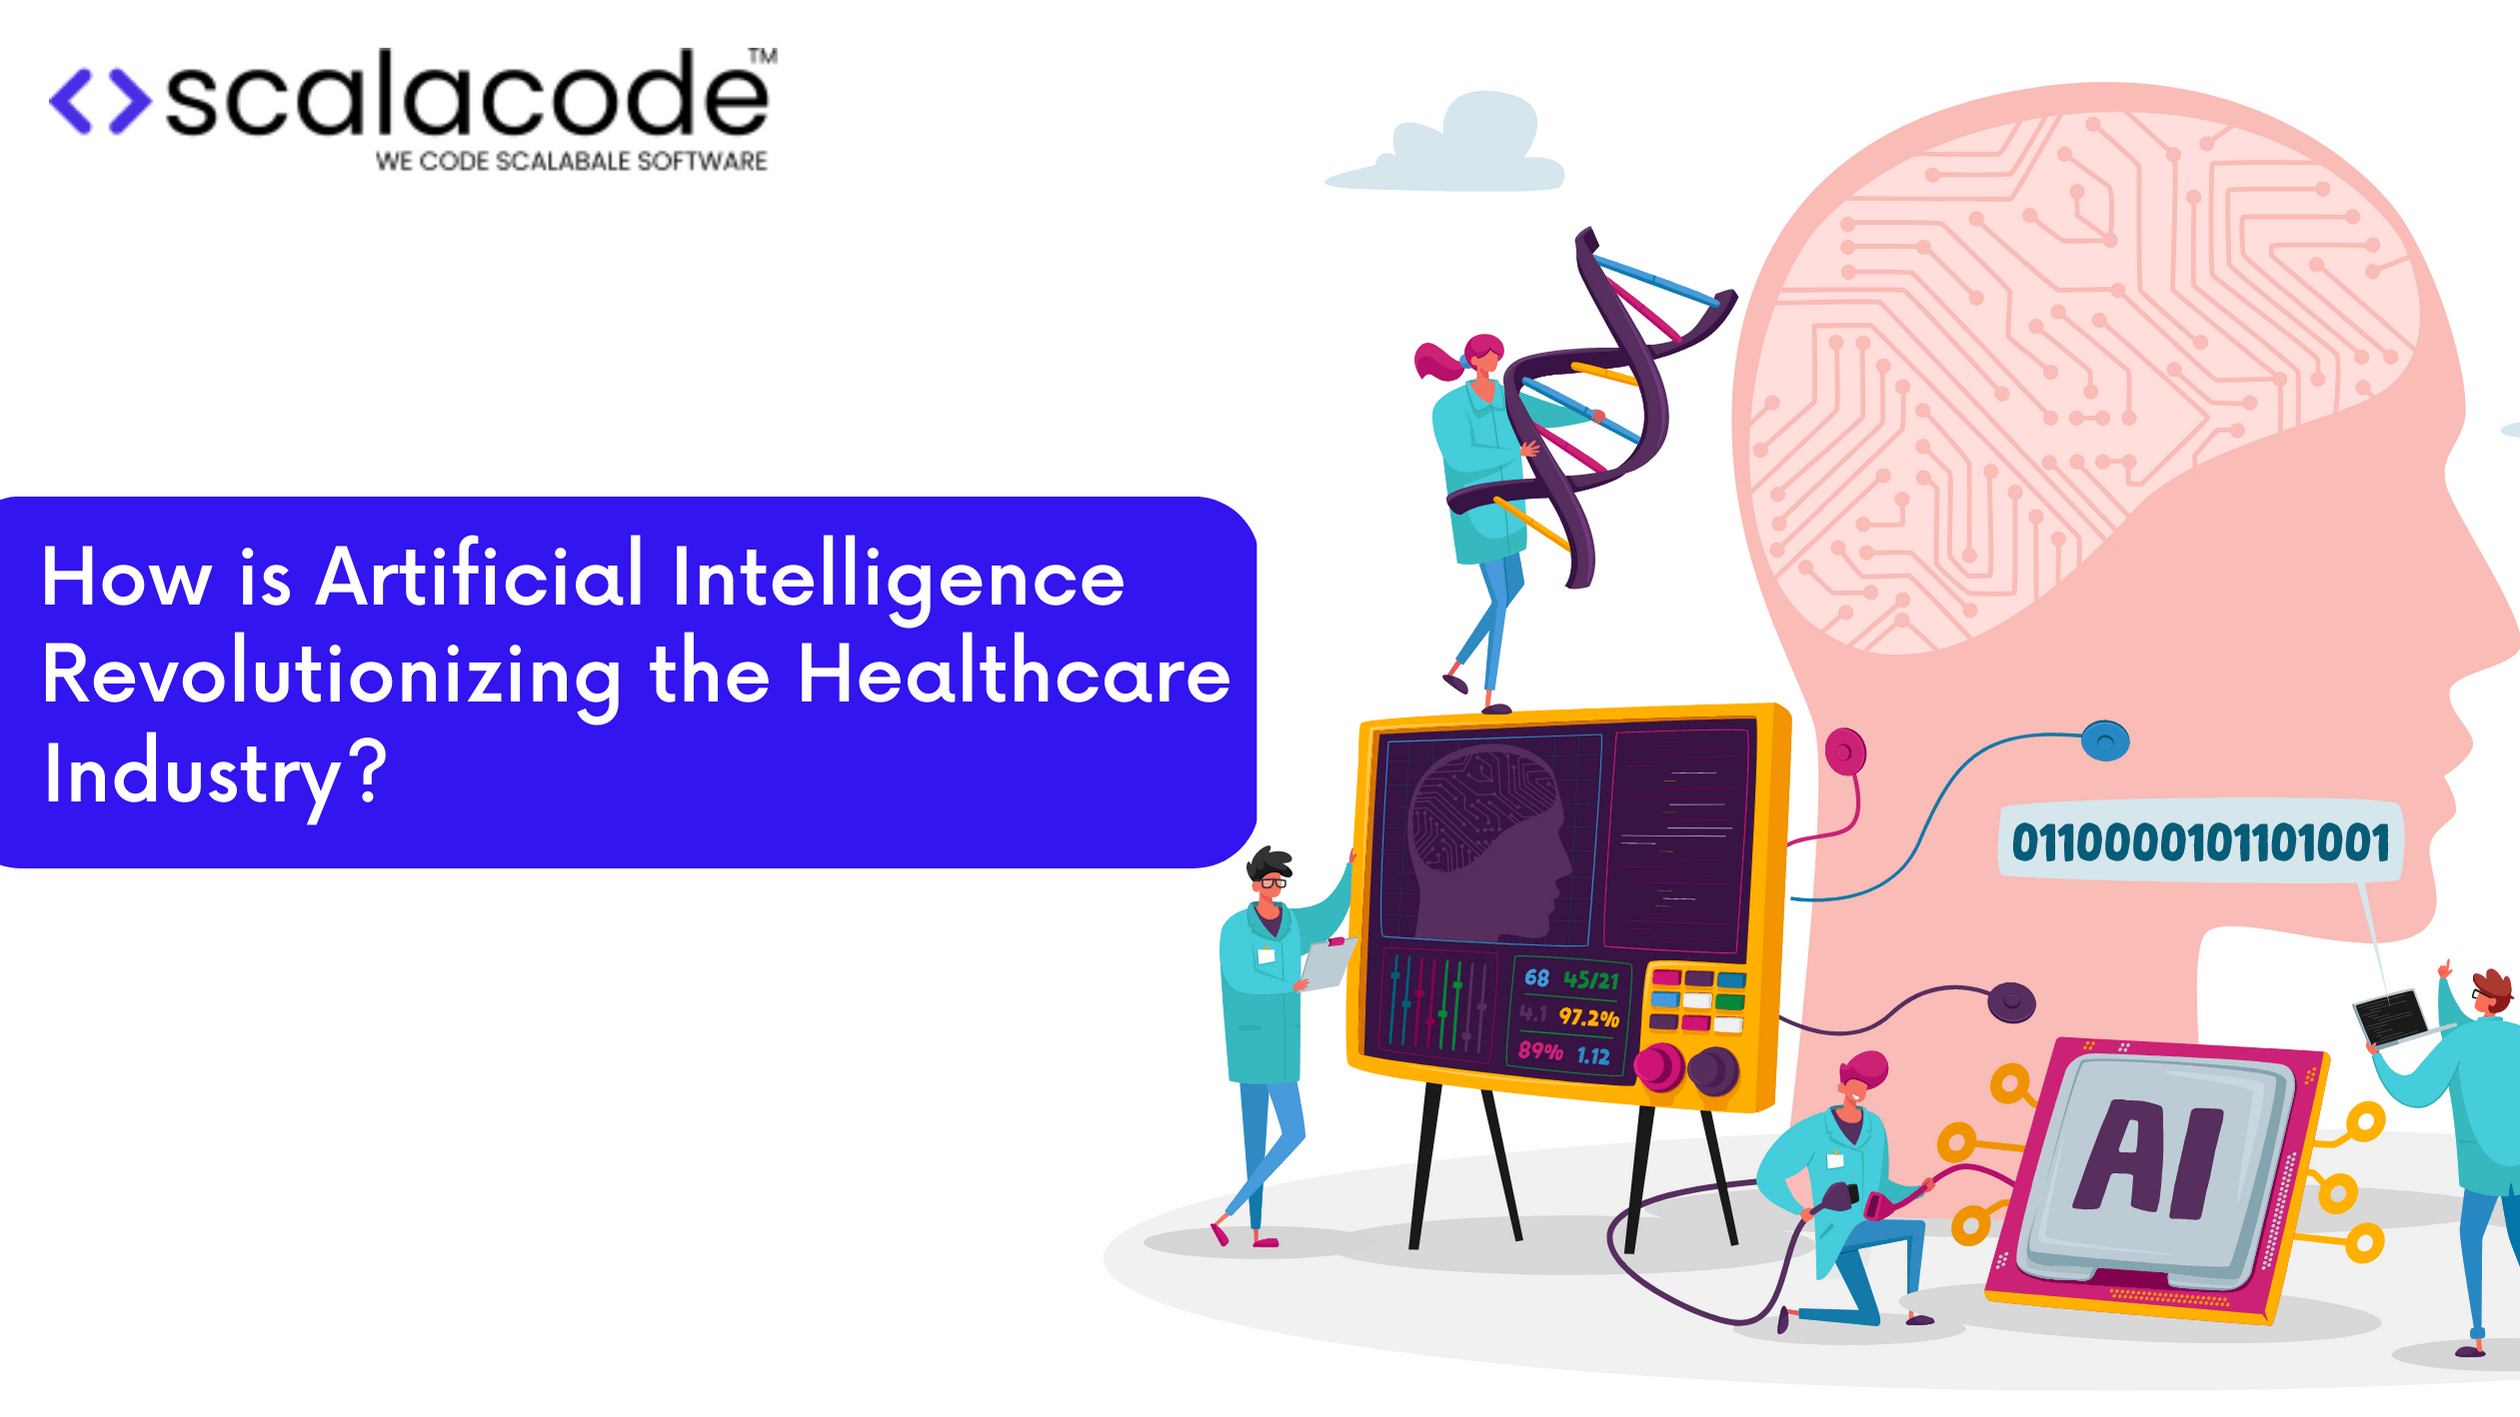 How is Artificial Intelligence Revolutionizing the Healthcare Industry?